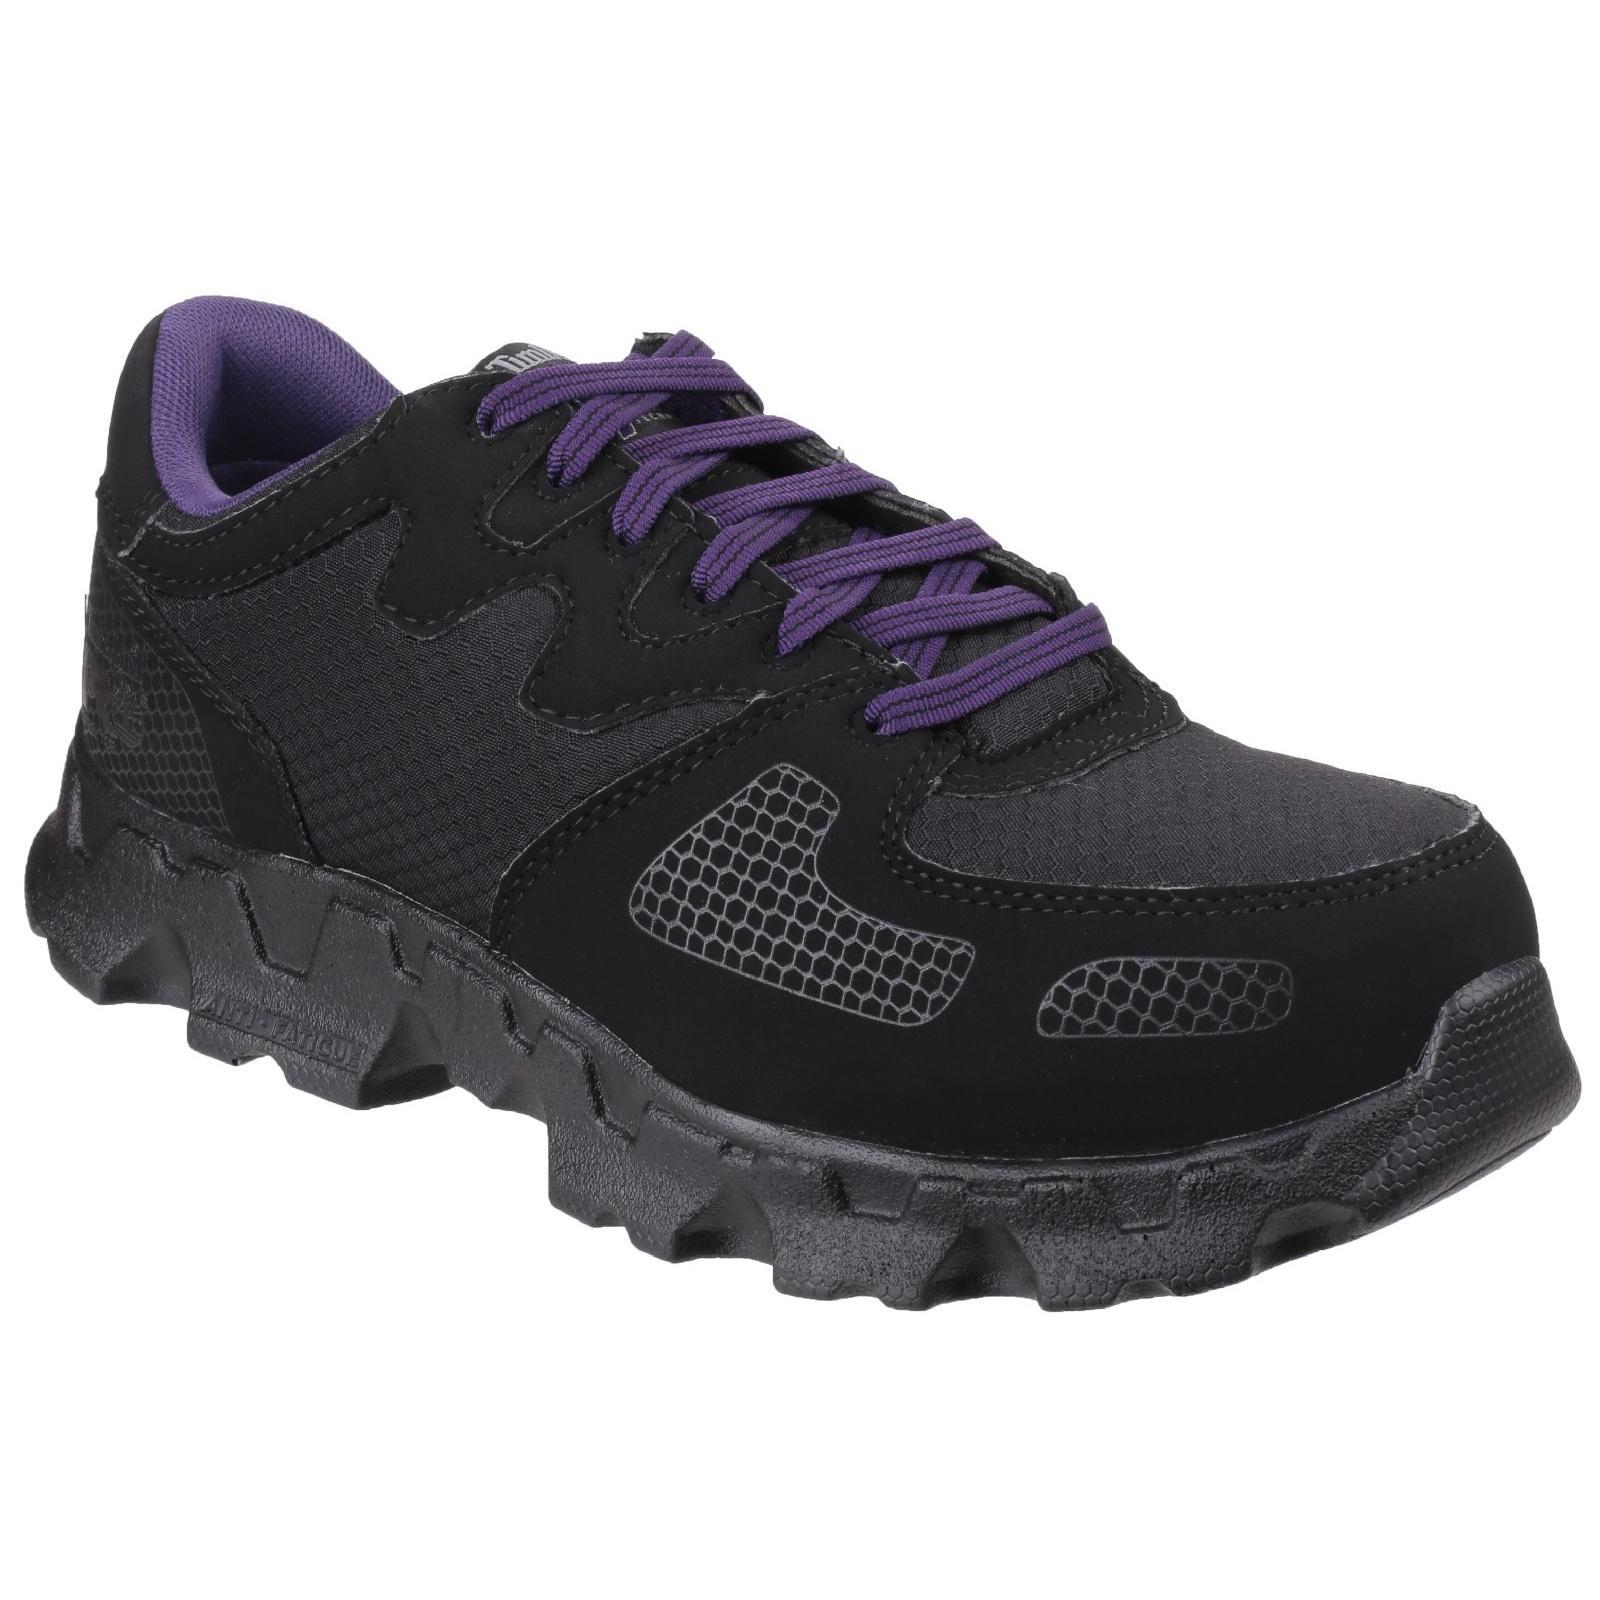 Timberland Pro Womens/Ladies Powertrain Low Lace Up Safety Shoes (Black) (6 UK)